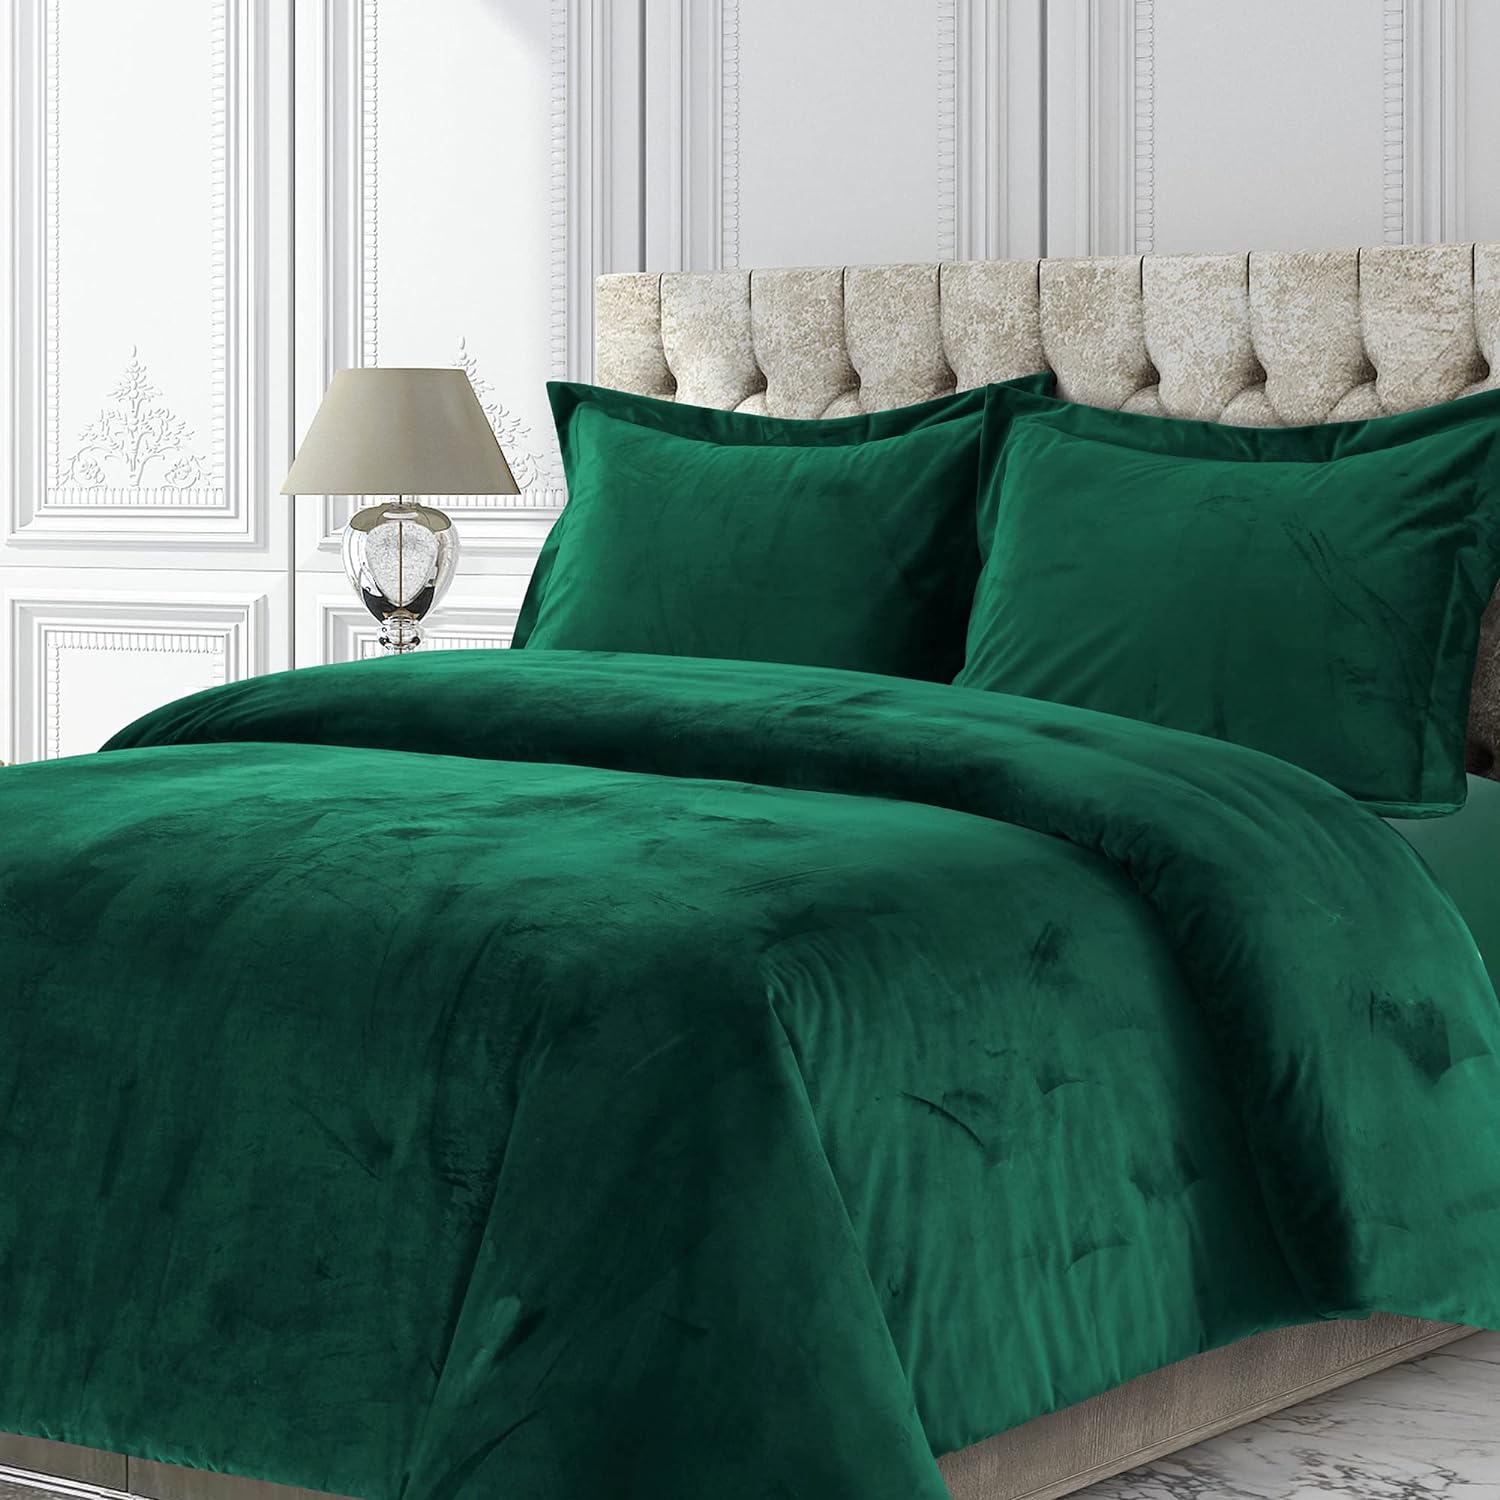 Tribeca Living Venice Velvet Duvet series, we select high-quality velvet fabrics to create soft to the touch, excellent warmth of the duvet cover. Whether it' Solid Duvet Cover' Solid Color design or Solid Color Duvet Covers' rich color selection, you can add nobility and luxury to your bedroom.